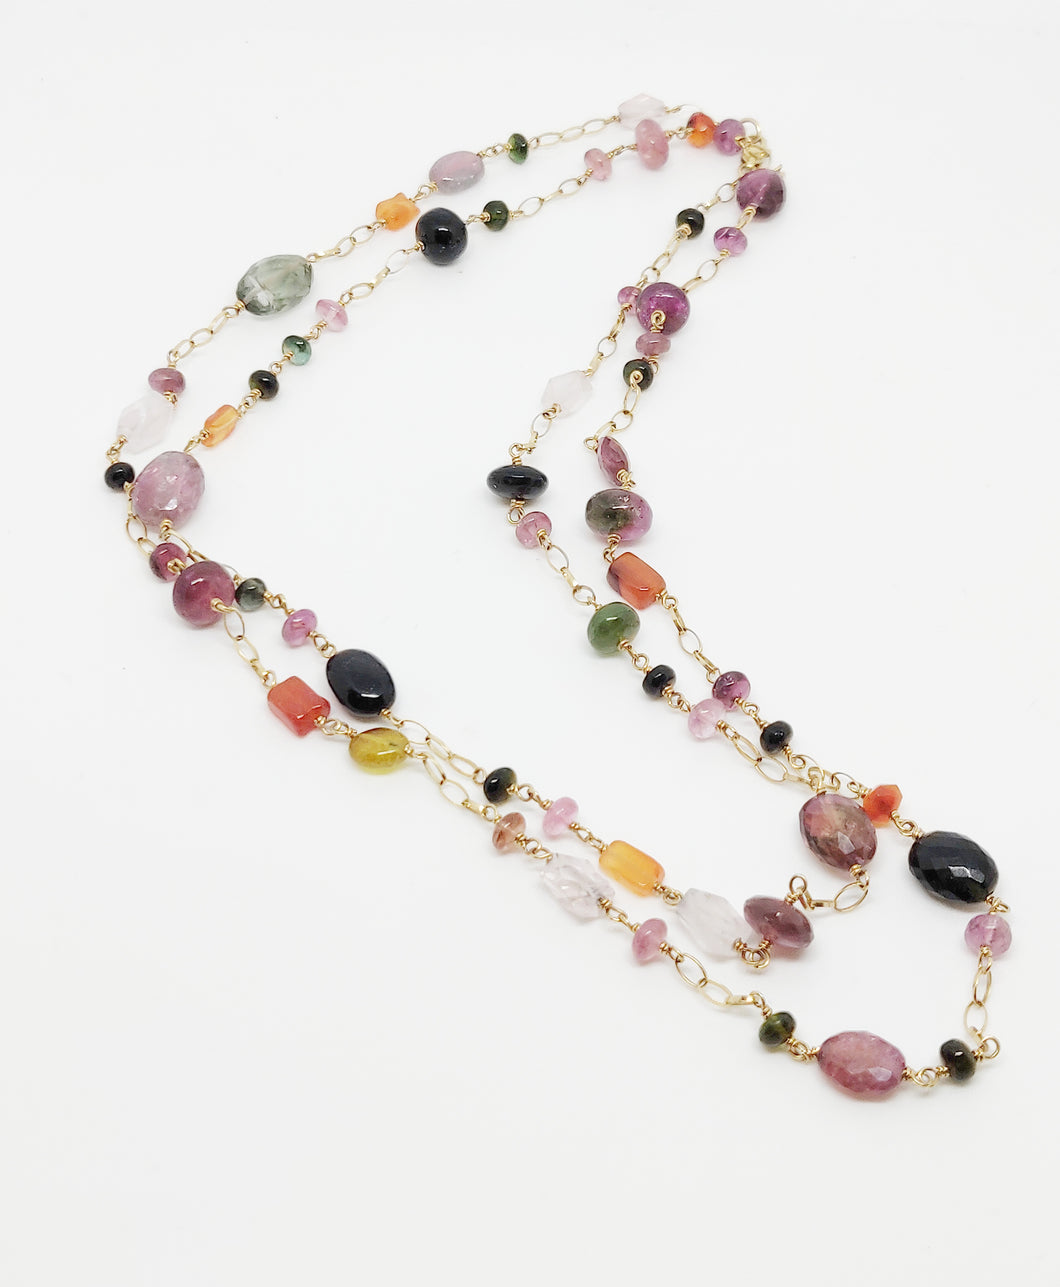 Gold and tourmaline necklace